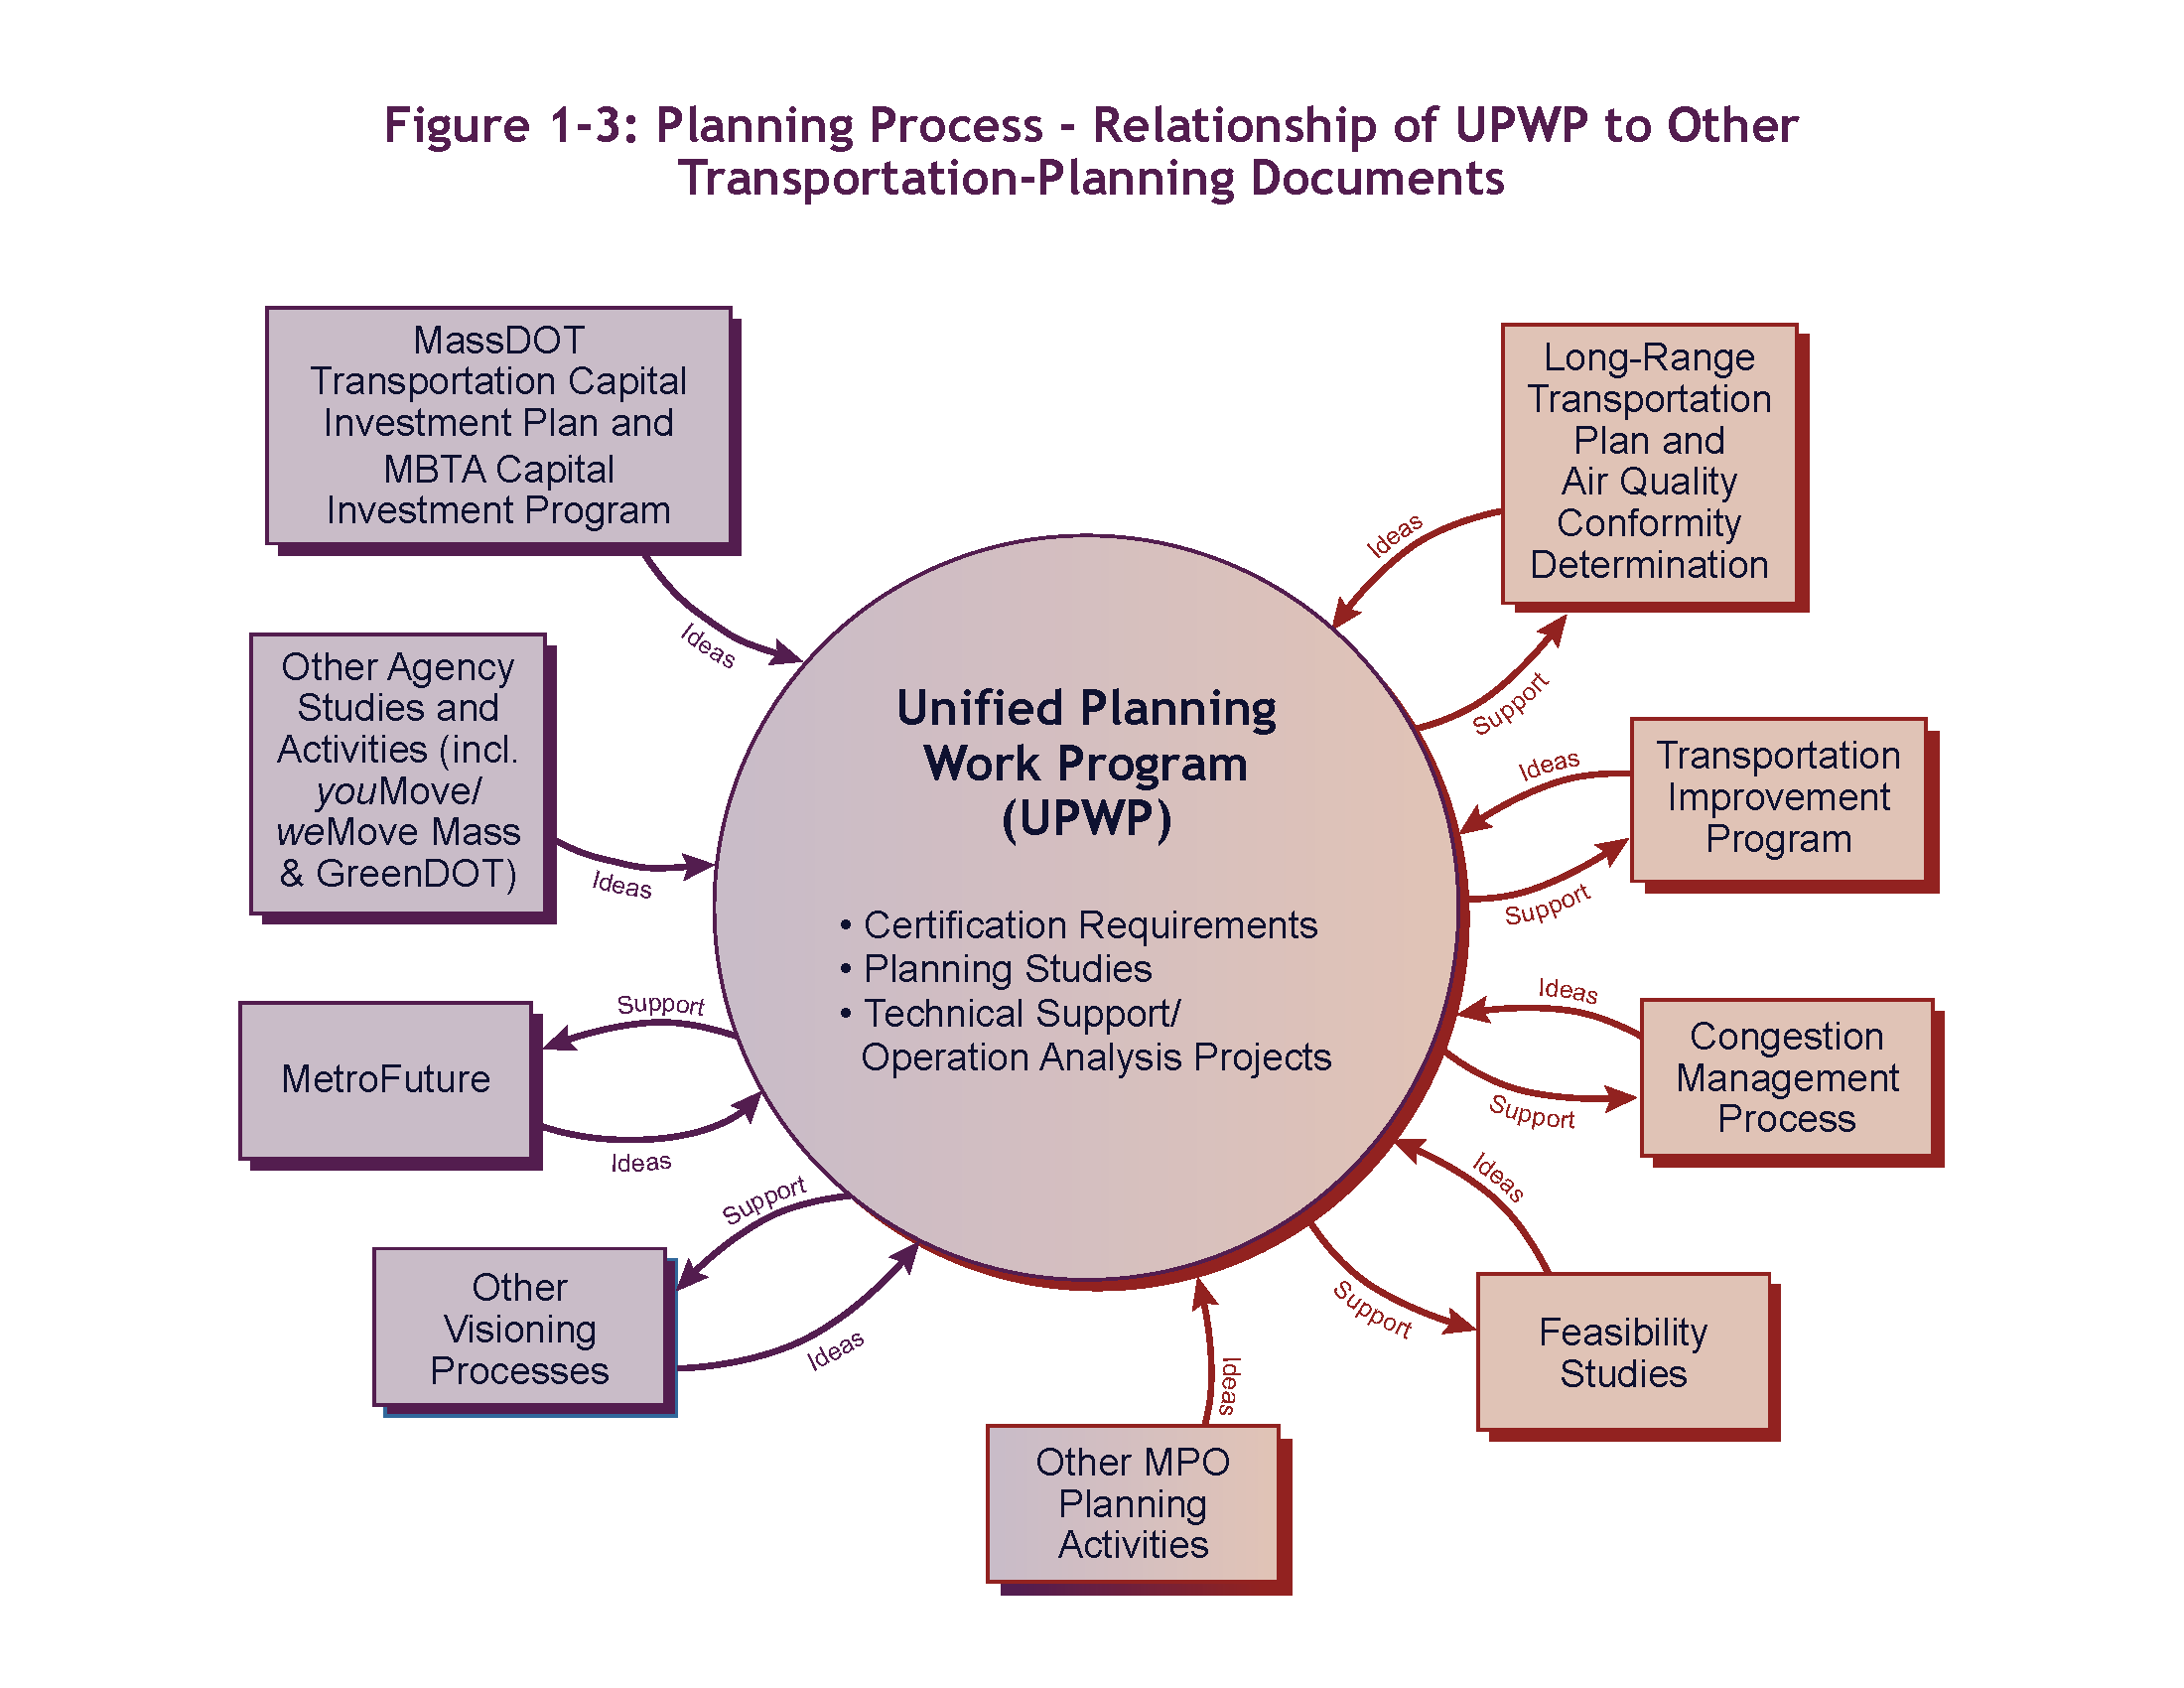 This figure shows how the UPWP relates to the variety of planning documents described in Section 1.3.2, “Coordination with Other Planning Activities.” Some arrows in this figure indicate the flow of support from the UPWP to different documents, and other arrows show the flow of ideas from various documents into the UPWP.